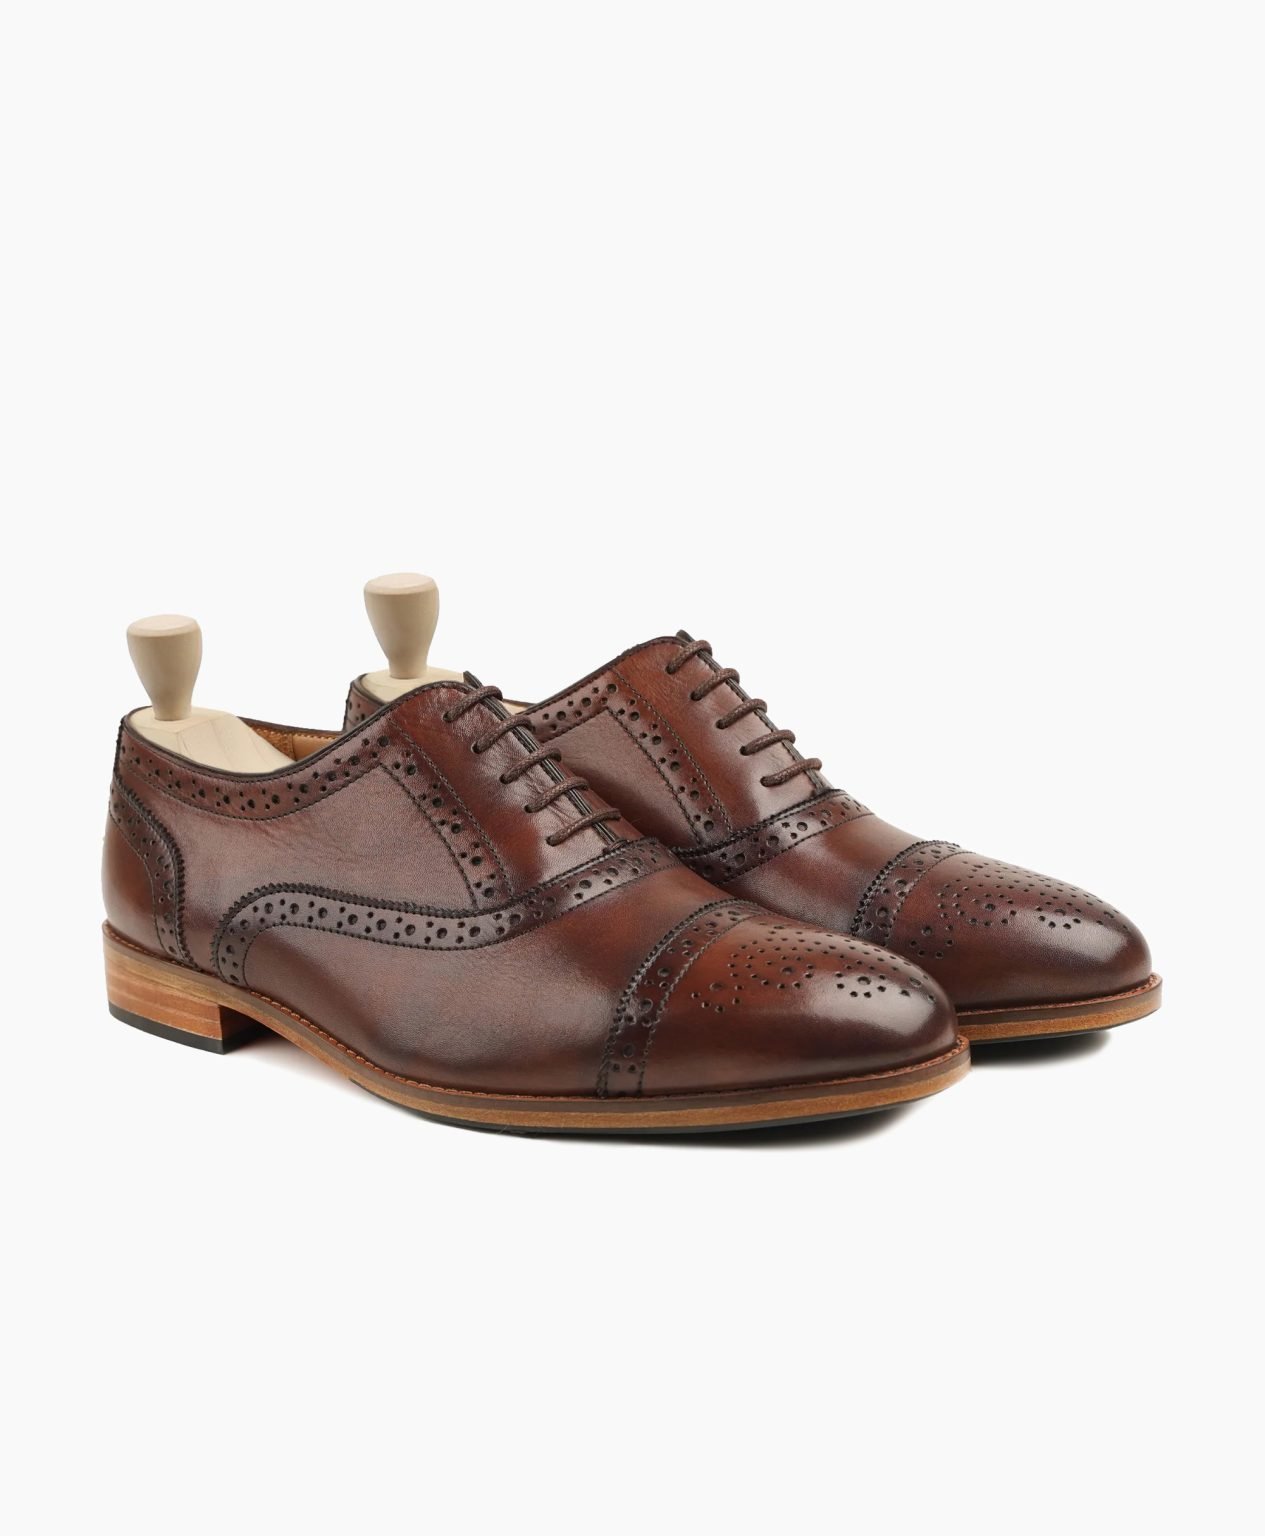 penzance-oxford-brown-leather-shoes-image200